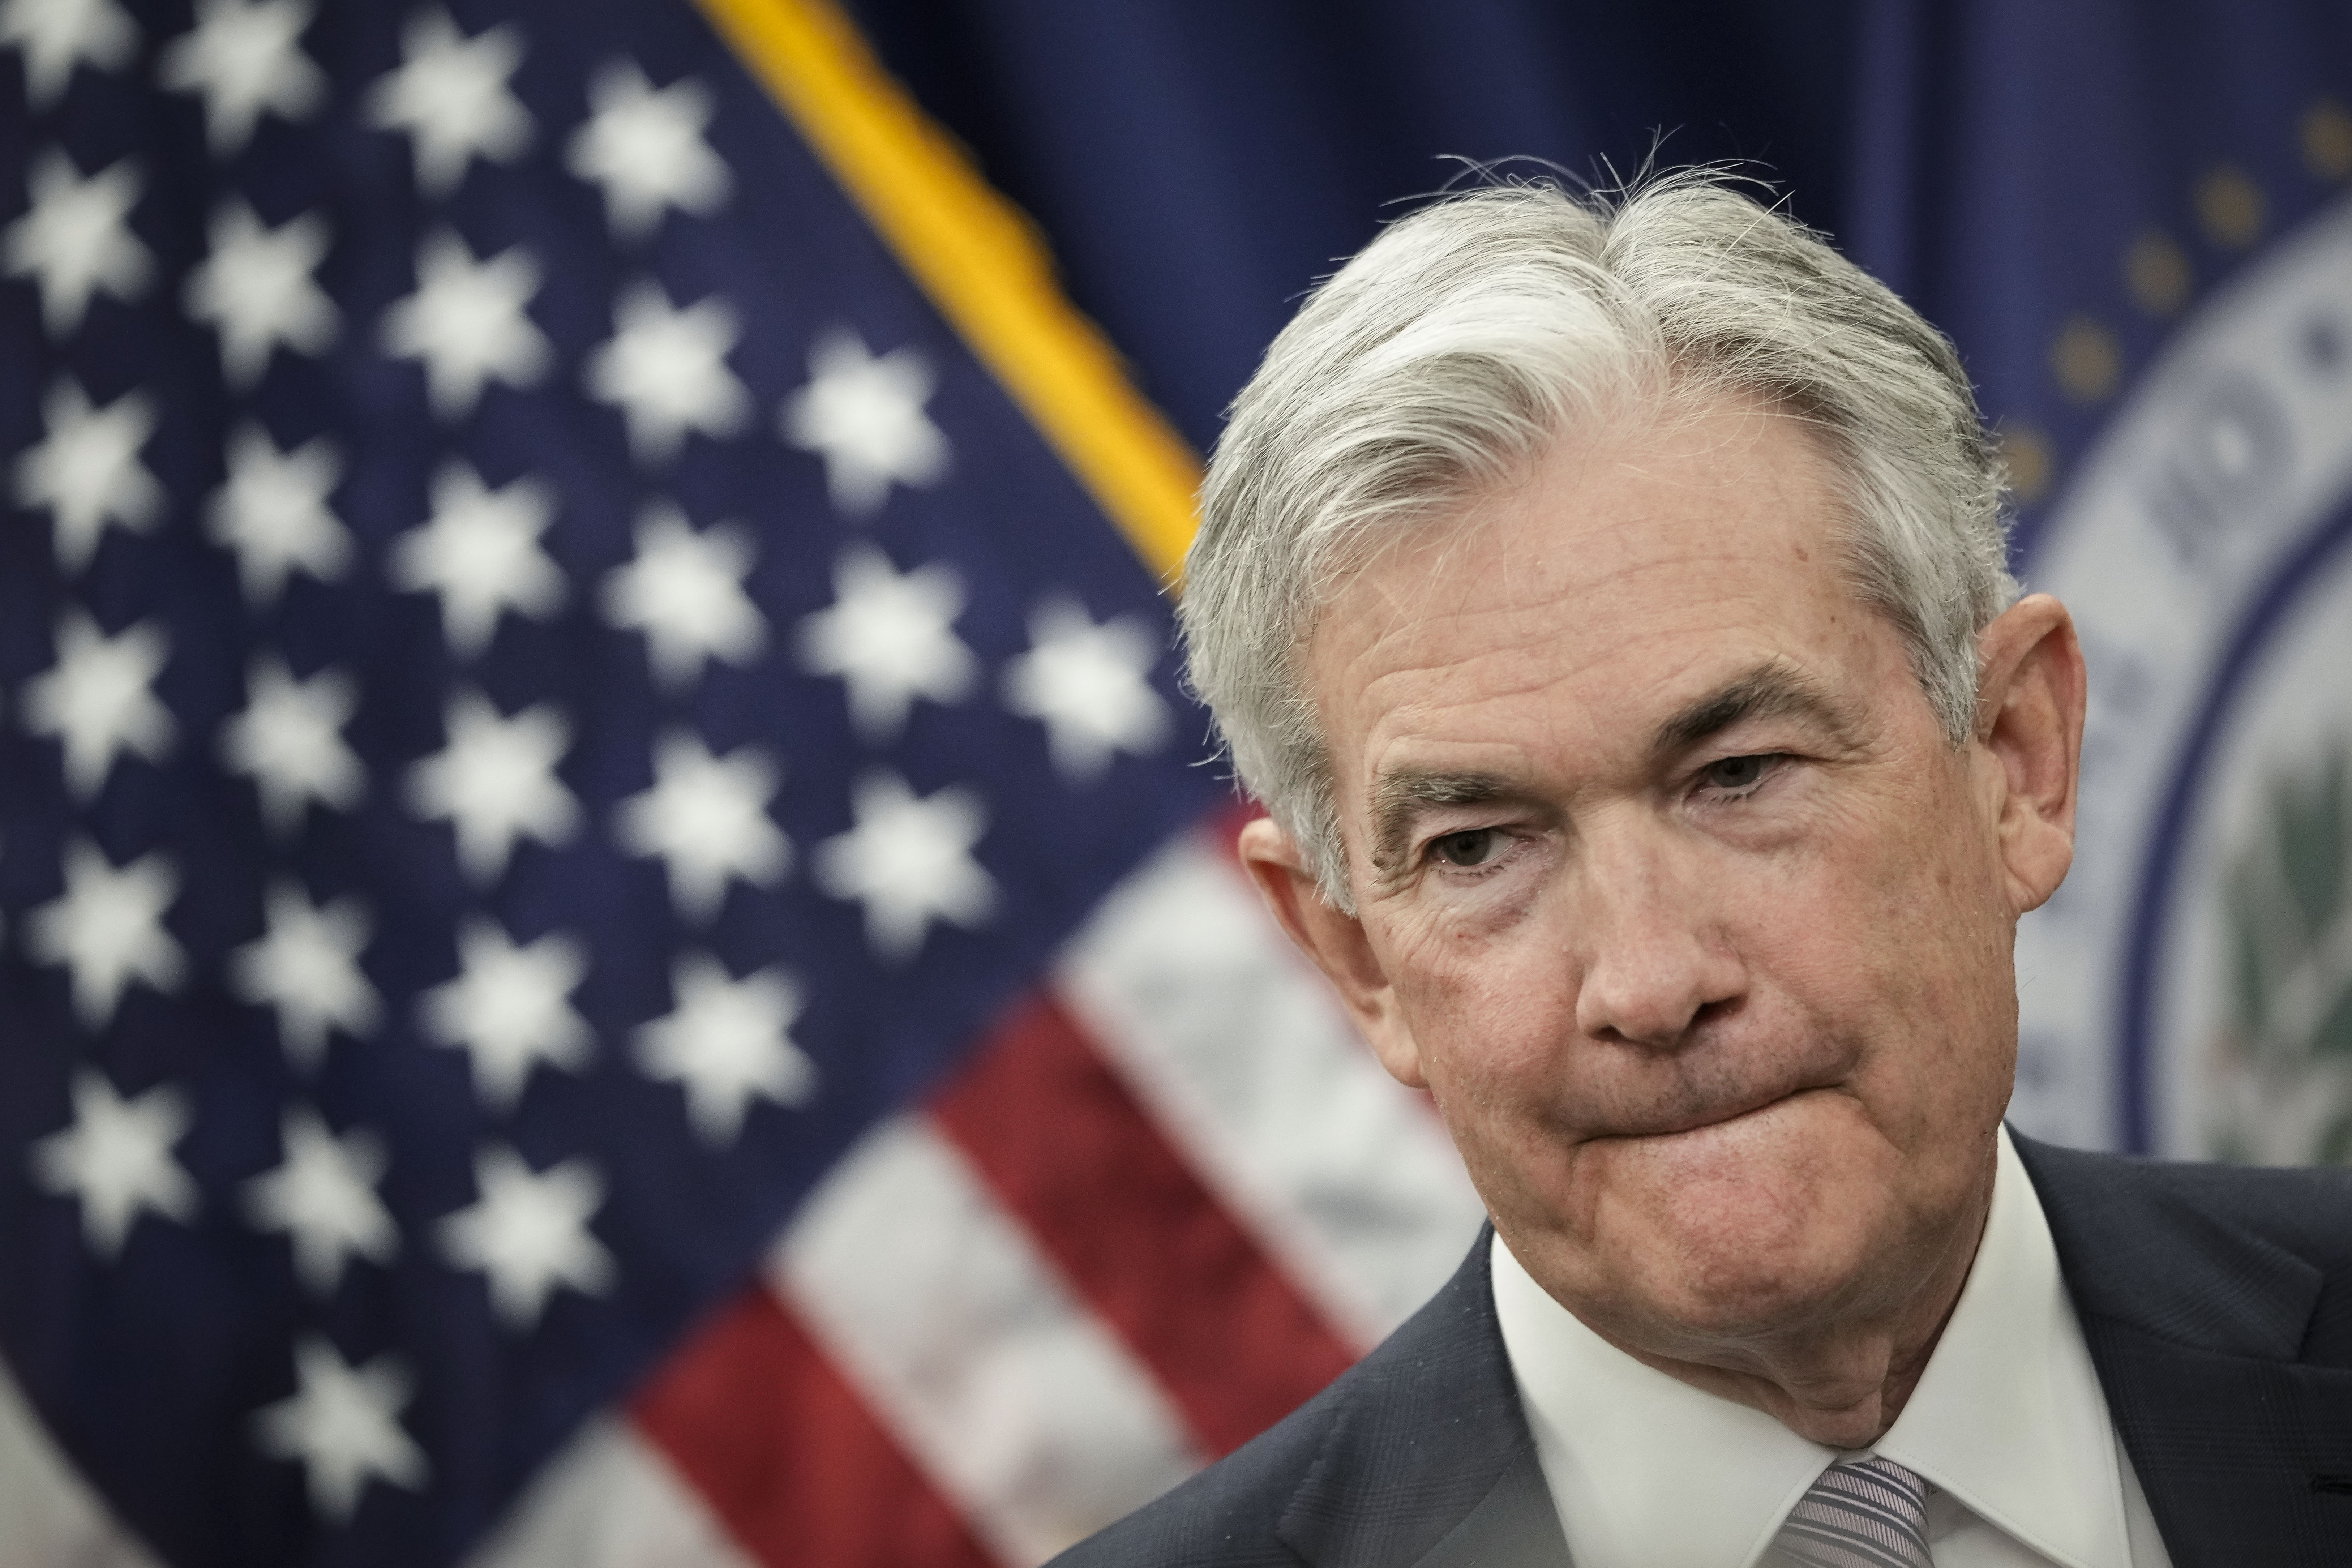 Fed may slow rate hikes in December: Jerome Powell